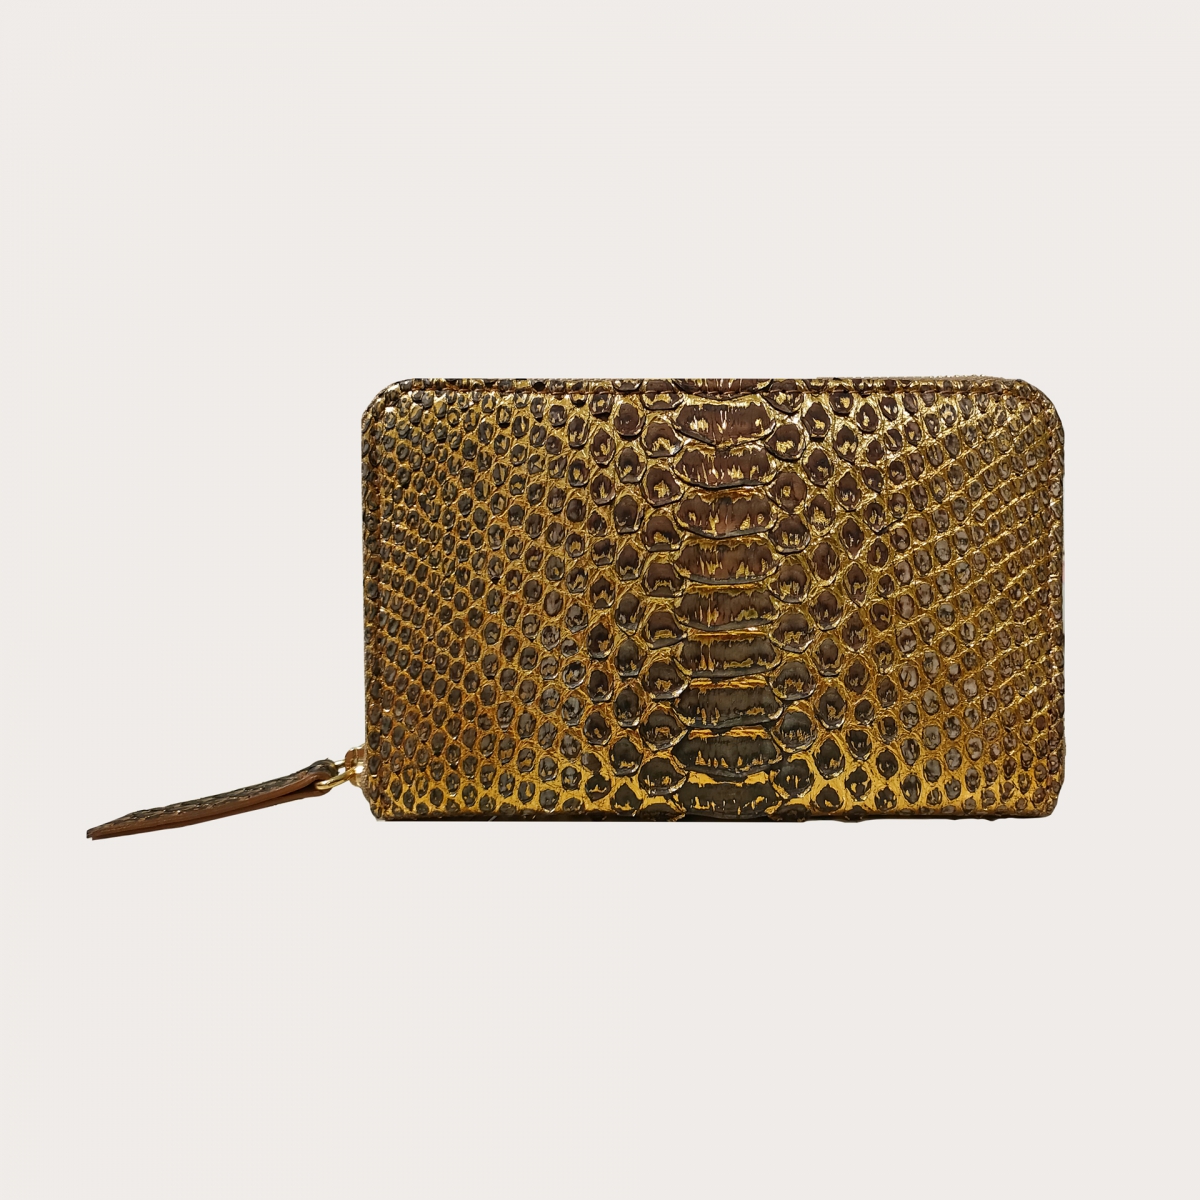 BRUCLE Women's compact wallet in python, hand-painted gold